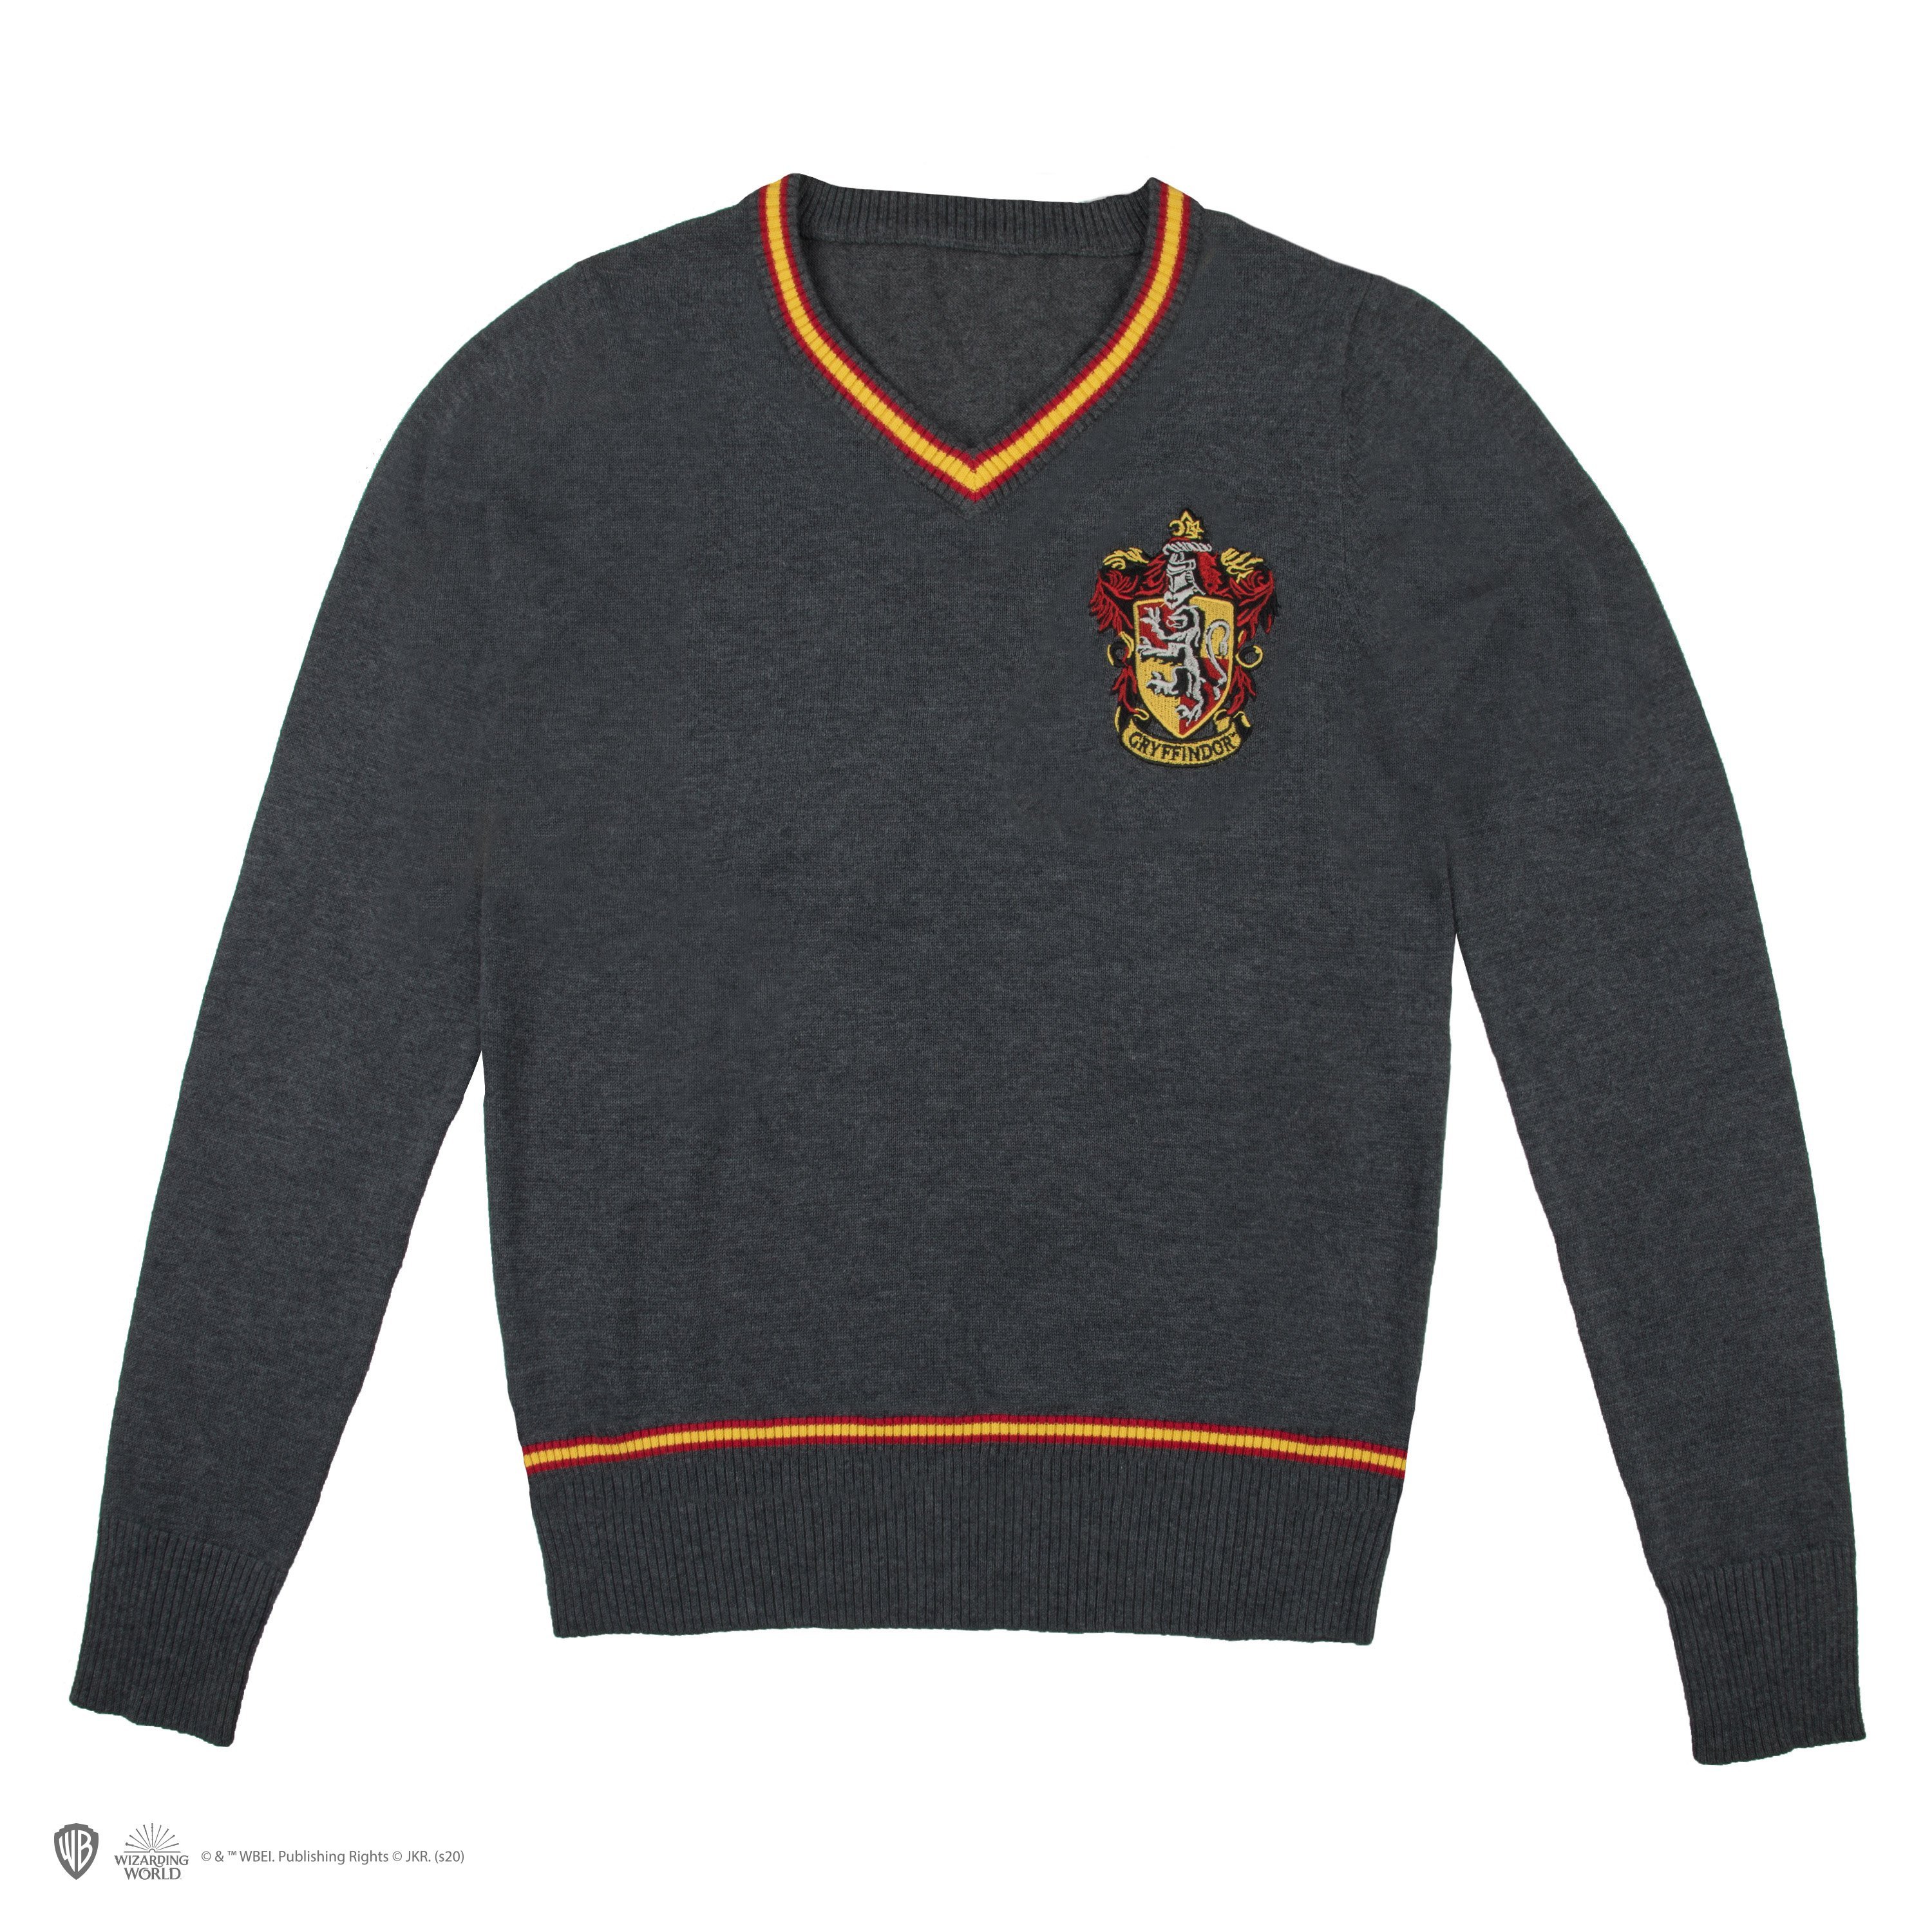 Harry Potter - Gryffindor - Grey Knitted Sweater - Small - Fan-shop